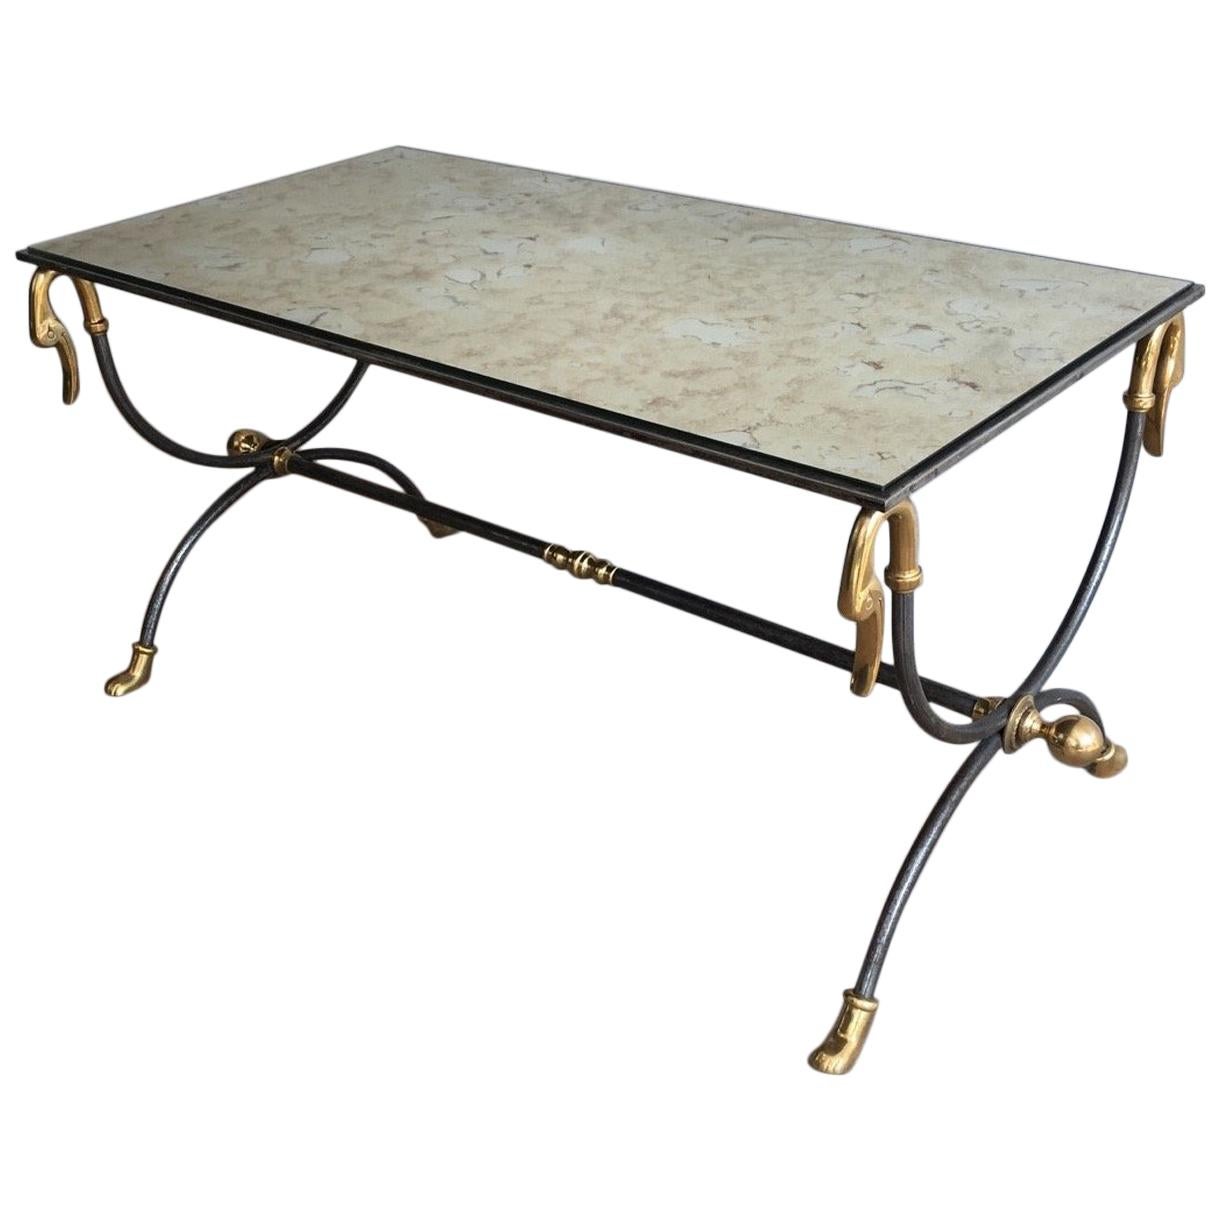 Maison Jansen Brushed Steel and Brass Coffee Table with Swanheads